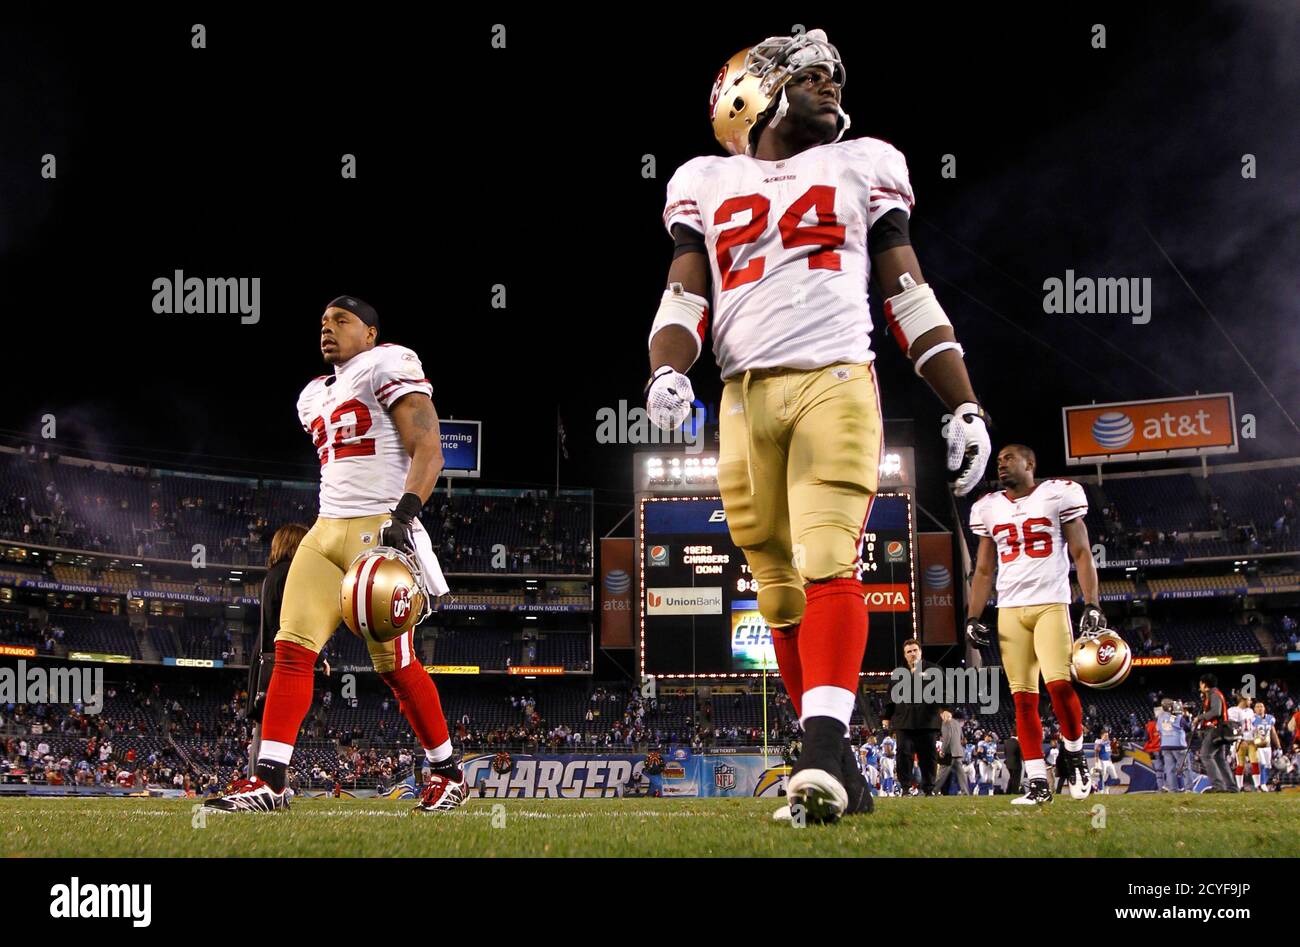 San Francisco 49ers running back Anthony Dixon (24) walks off the field with teammates Nate Clements (22) and cornerback Shawntae Spencer (36) after losing to the San Diego Chargers following their NFL football game in San Diego, California December 16, 2010. REUTERS/Mike Blake   (UNITED STATES - Tags: SPORT FOOTBALL) Stock Photo